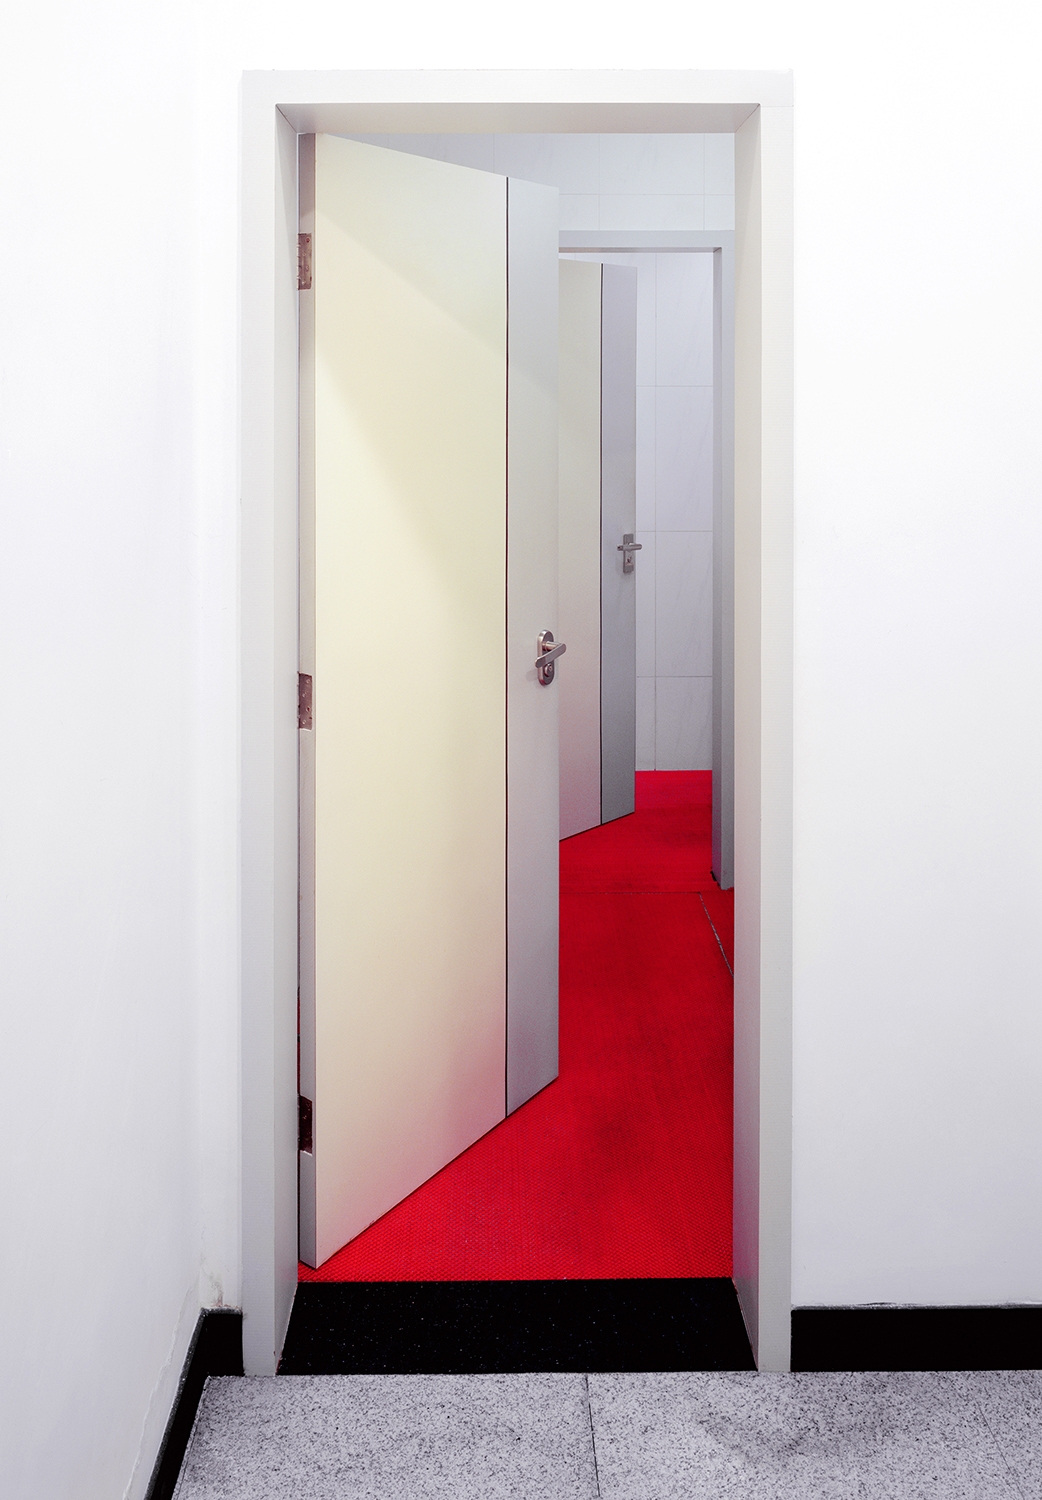 A set of white open doors leads to an empty red room.